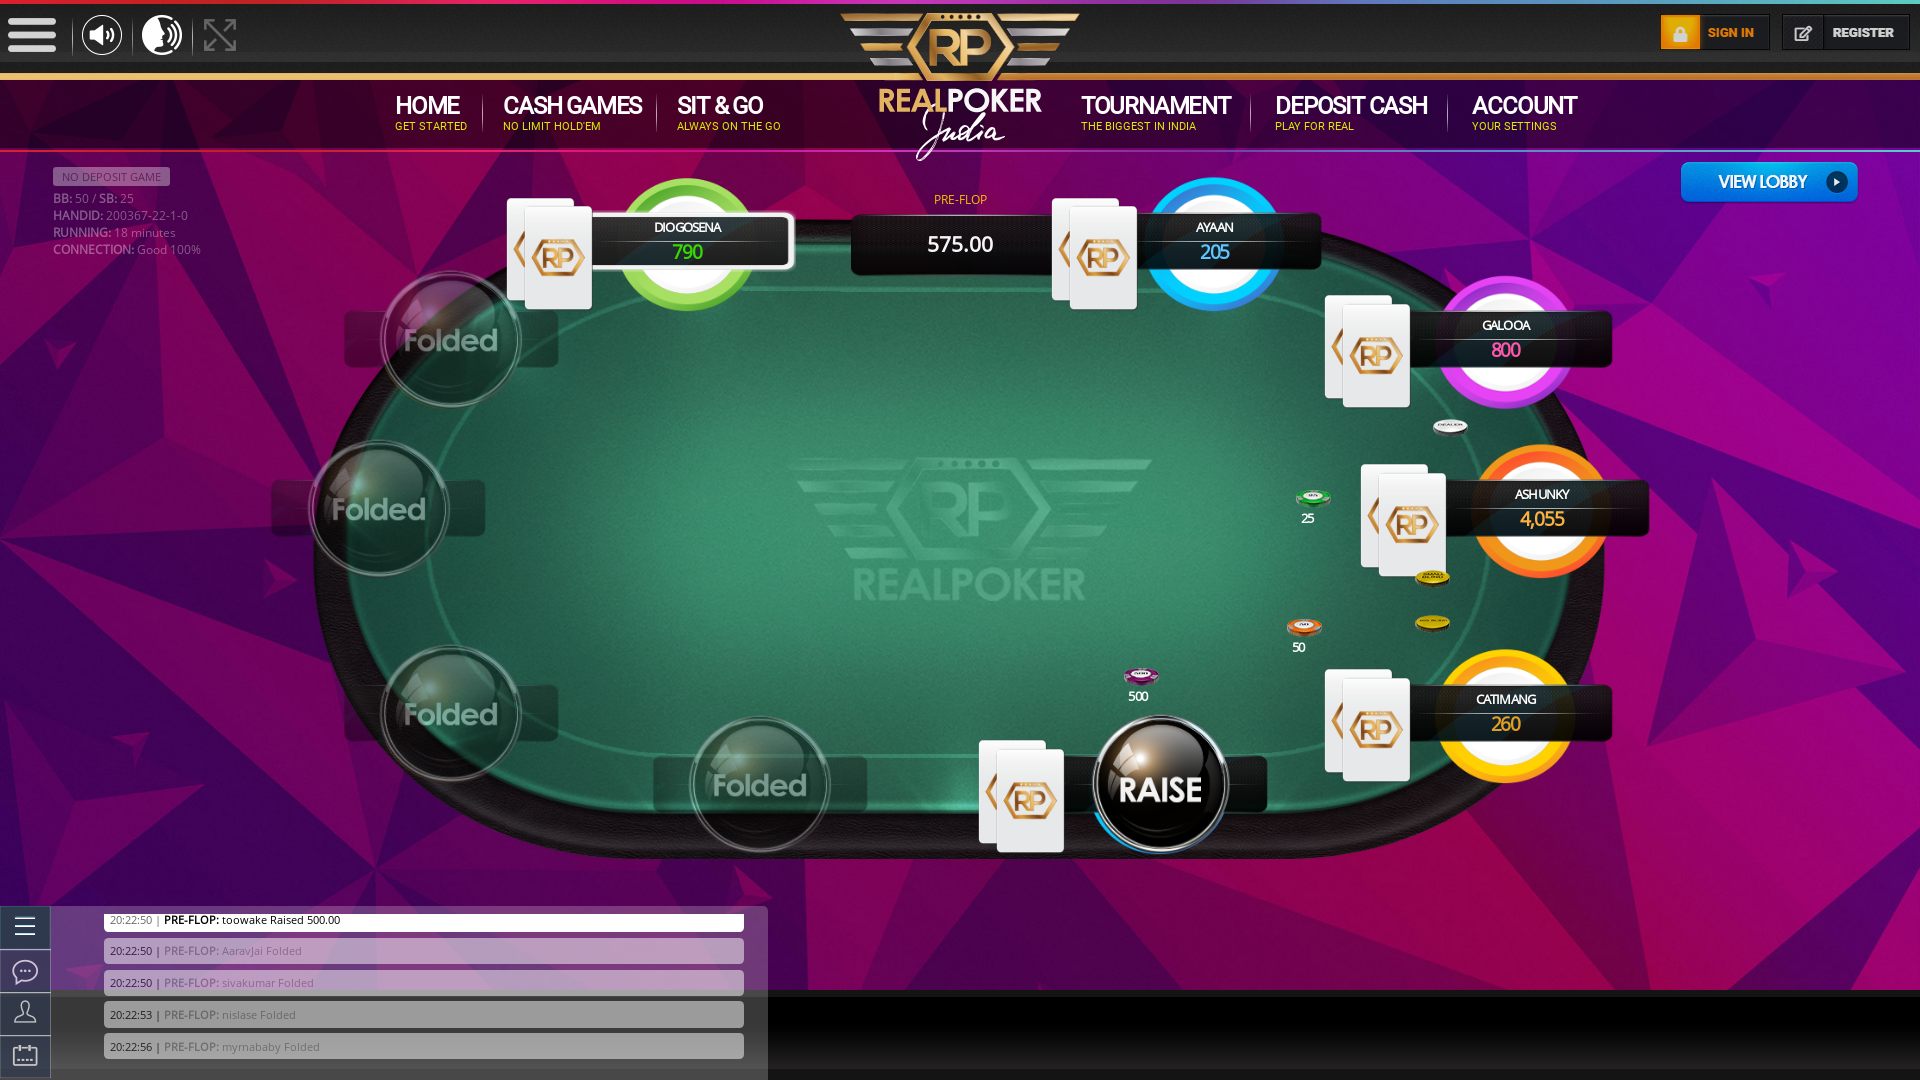 Real poker 10 player table in the 18th minute of the match